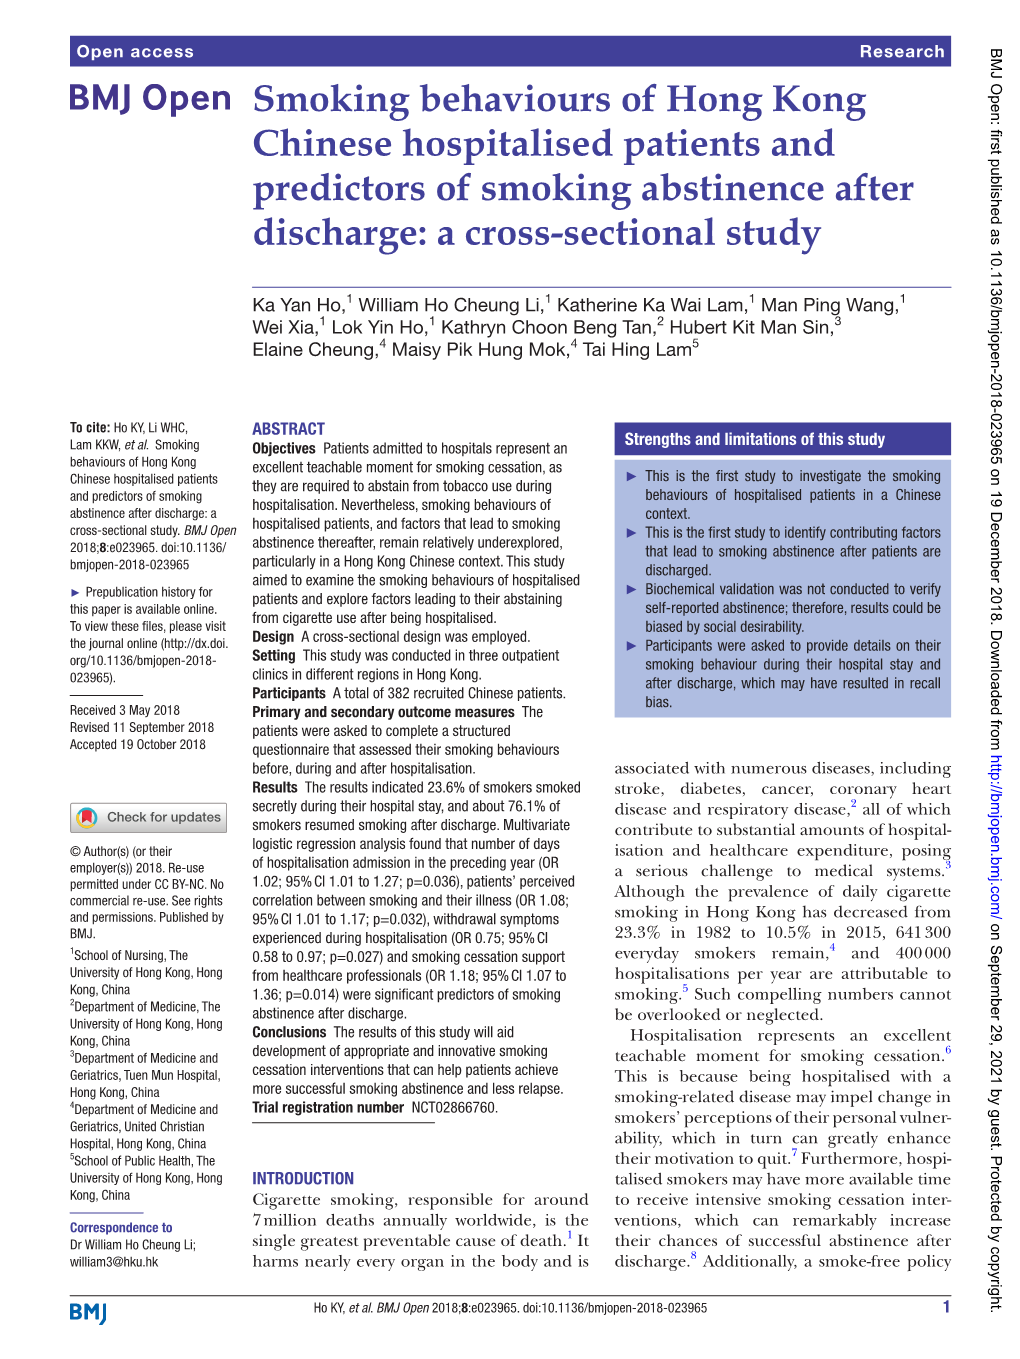 Smoking Behaviours of Hong Kong Chinese Hospitalised Patients and Predictors of Smoking Abstinence After Discharge: a Cross-Sectional Study